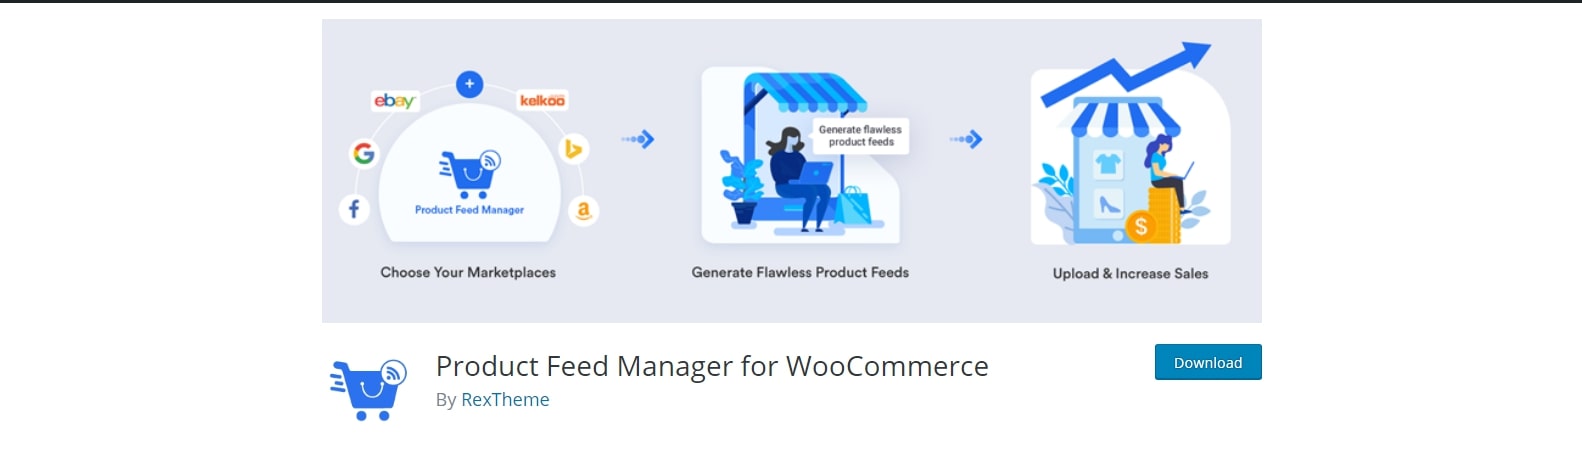 WooCommerce Product Feed Manager